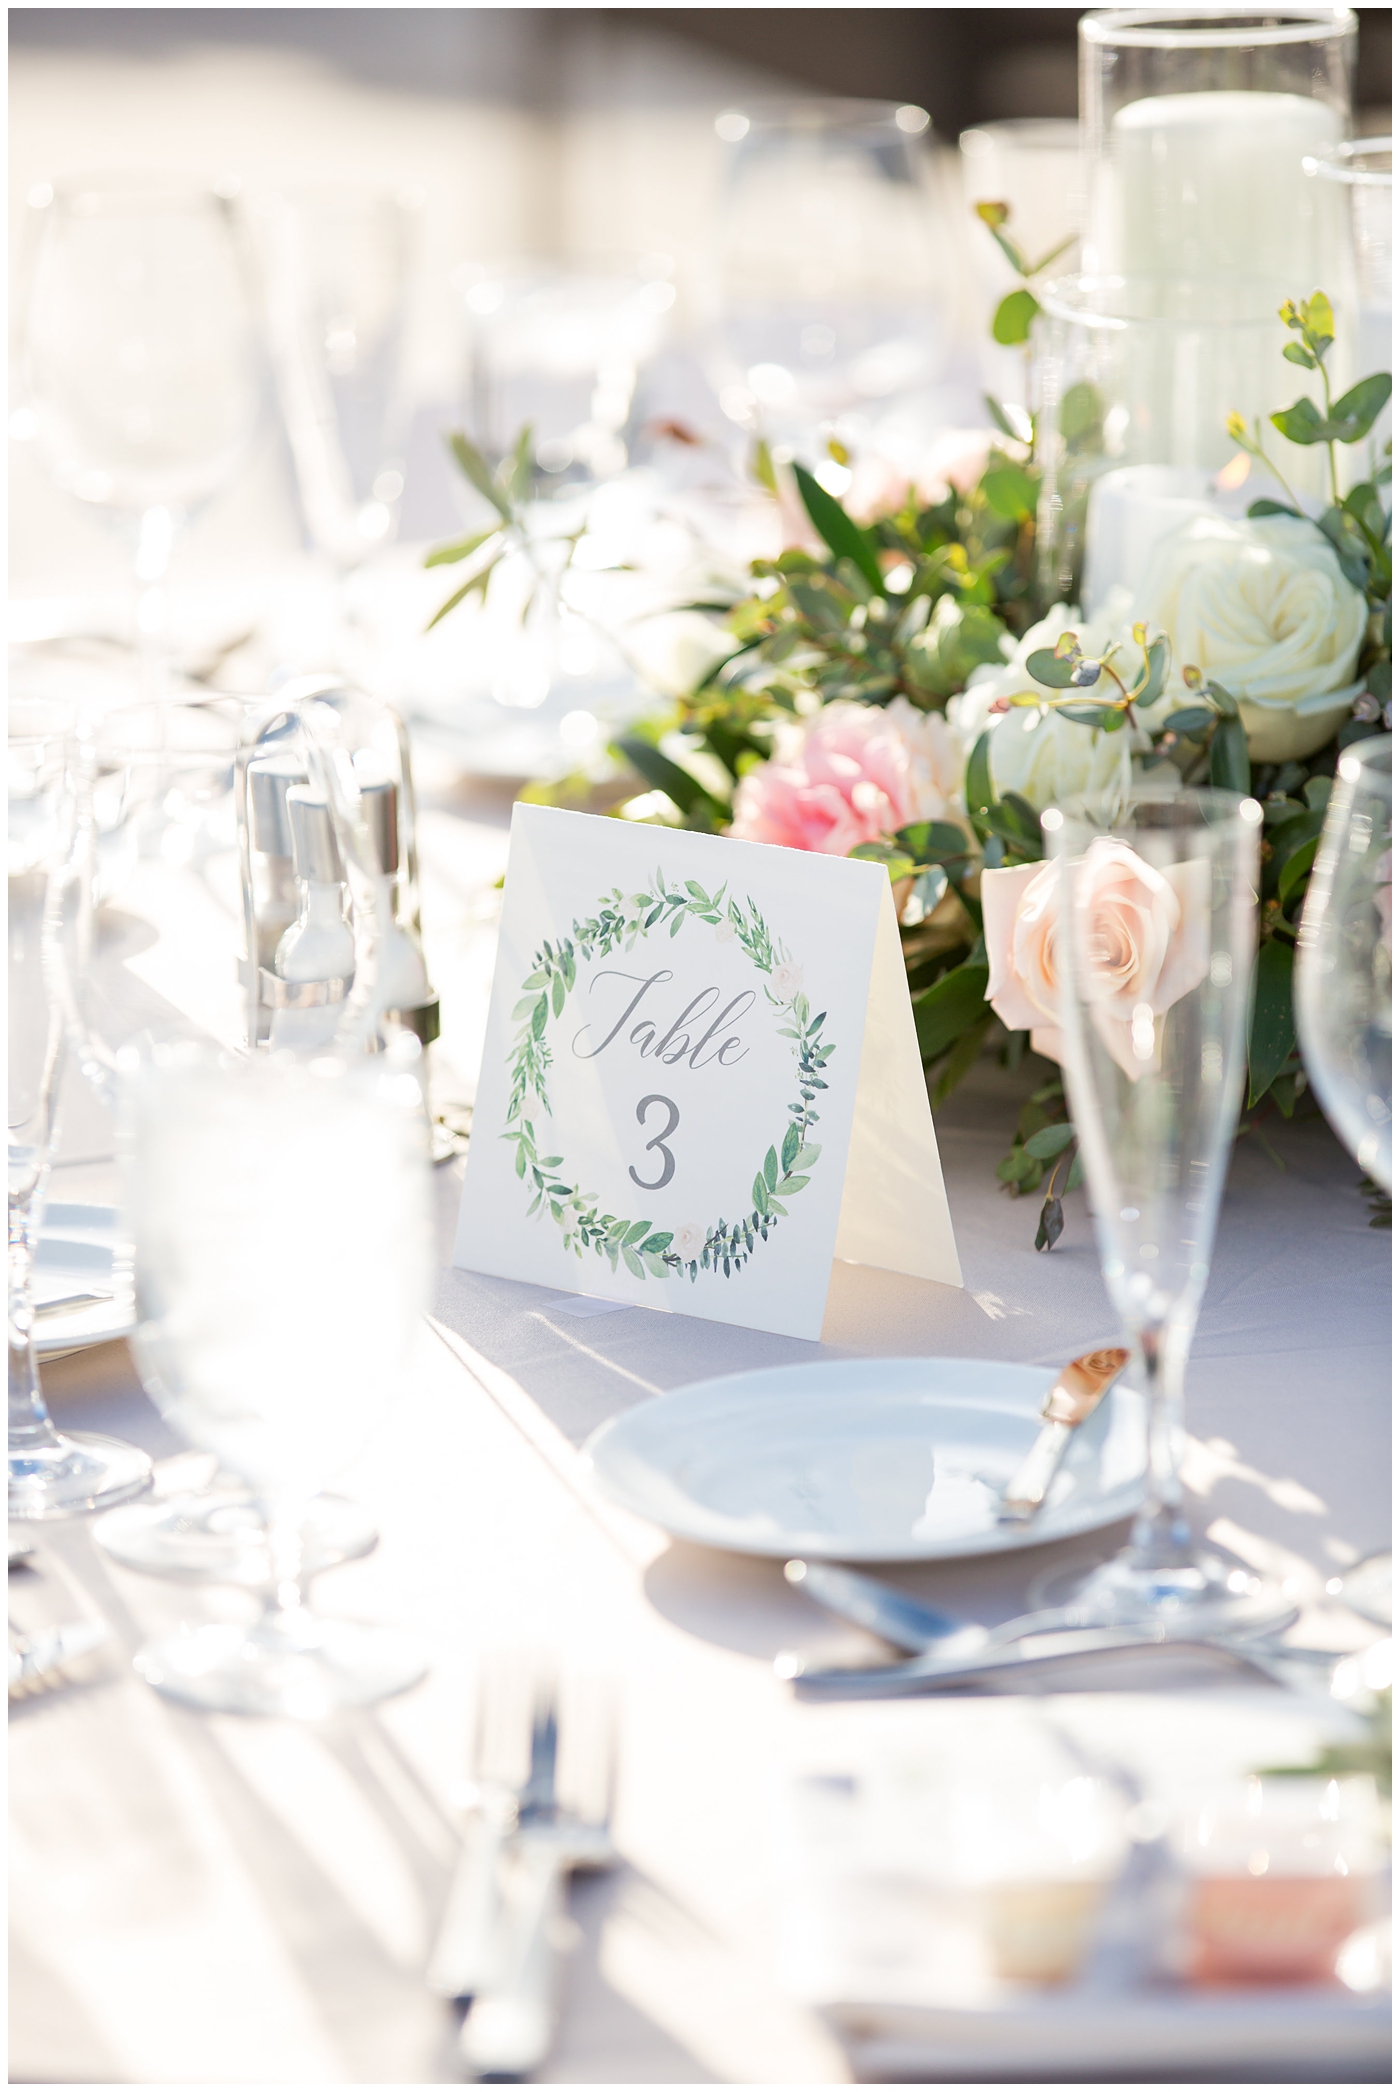 table number with green watercolor on blush linen with floral centerpiece with greenery white, blush, and soft pink roses with candles in the middle outdoor rooftop wedding reception detail